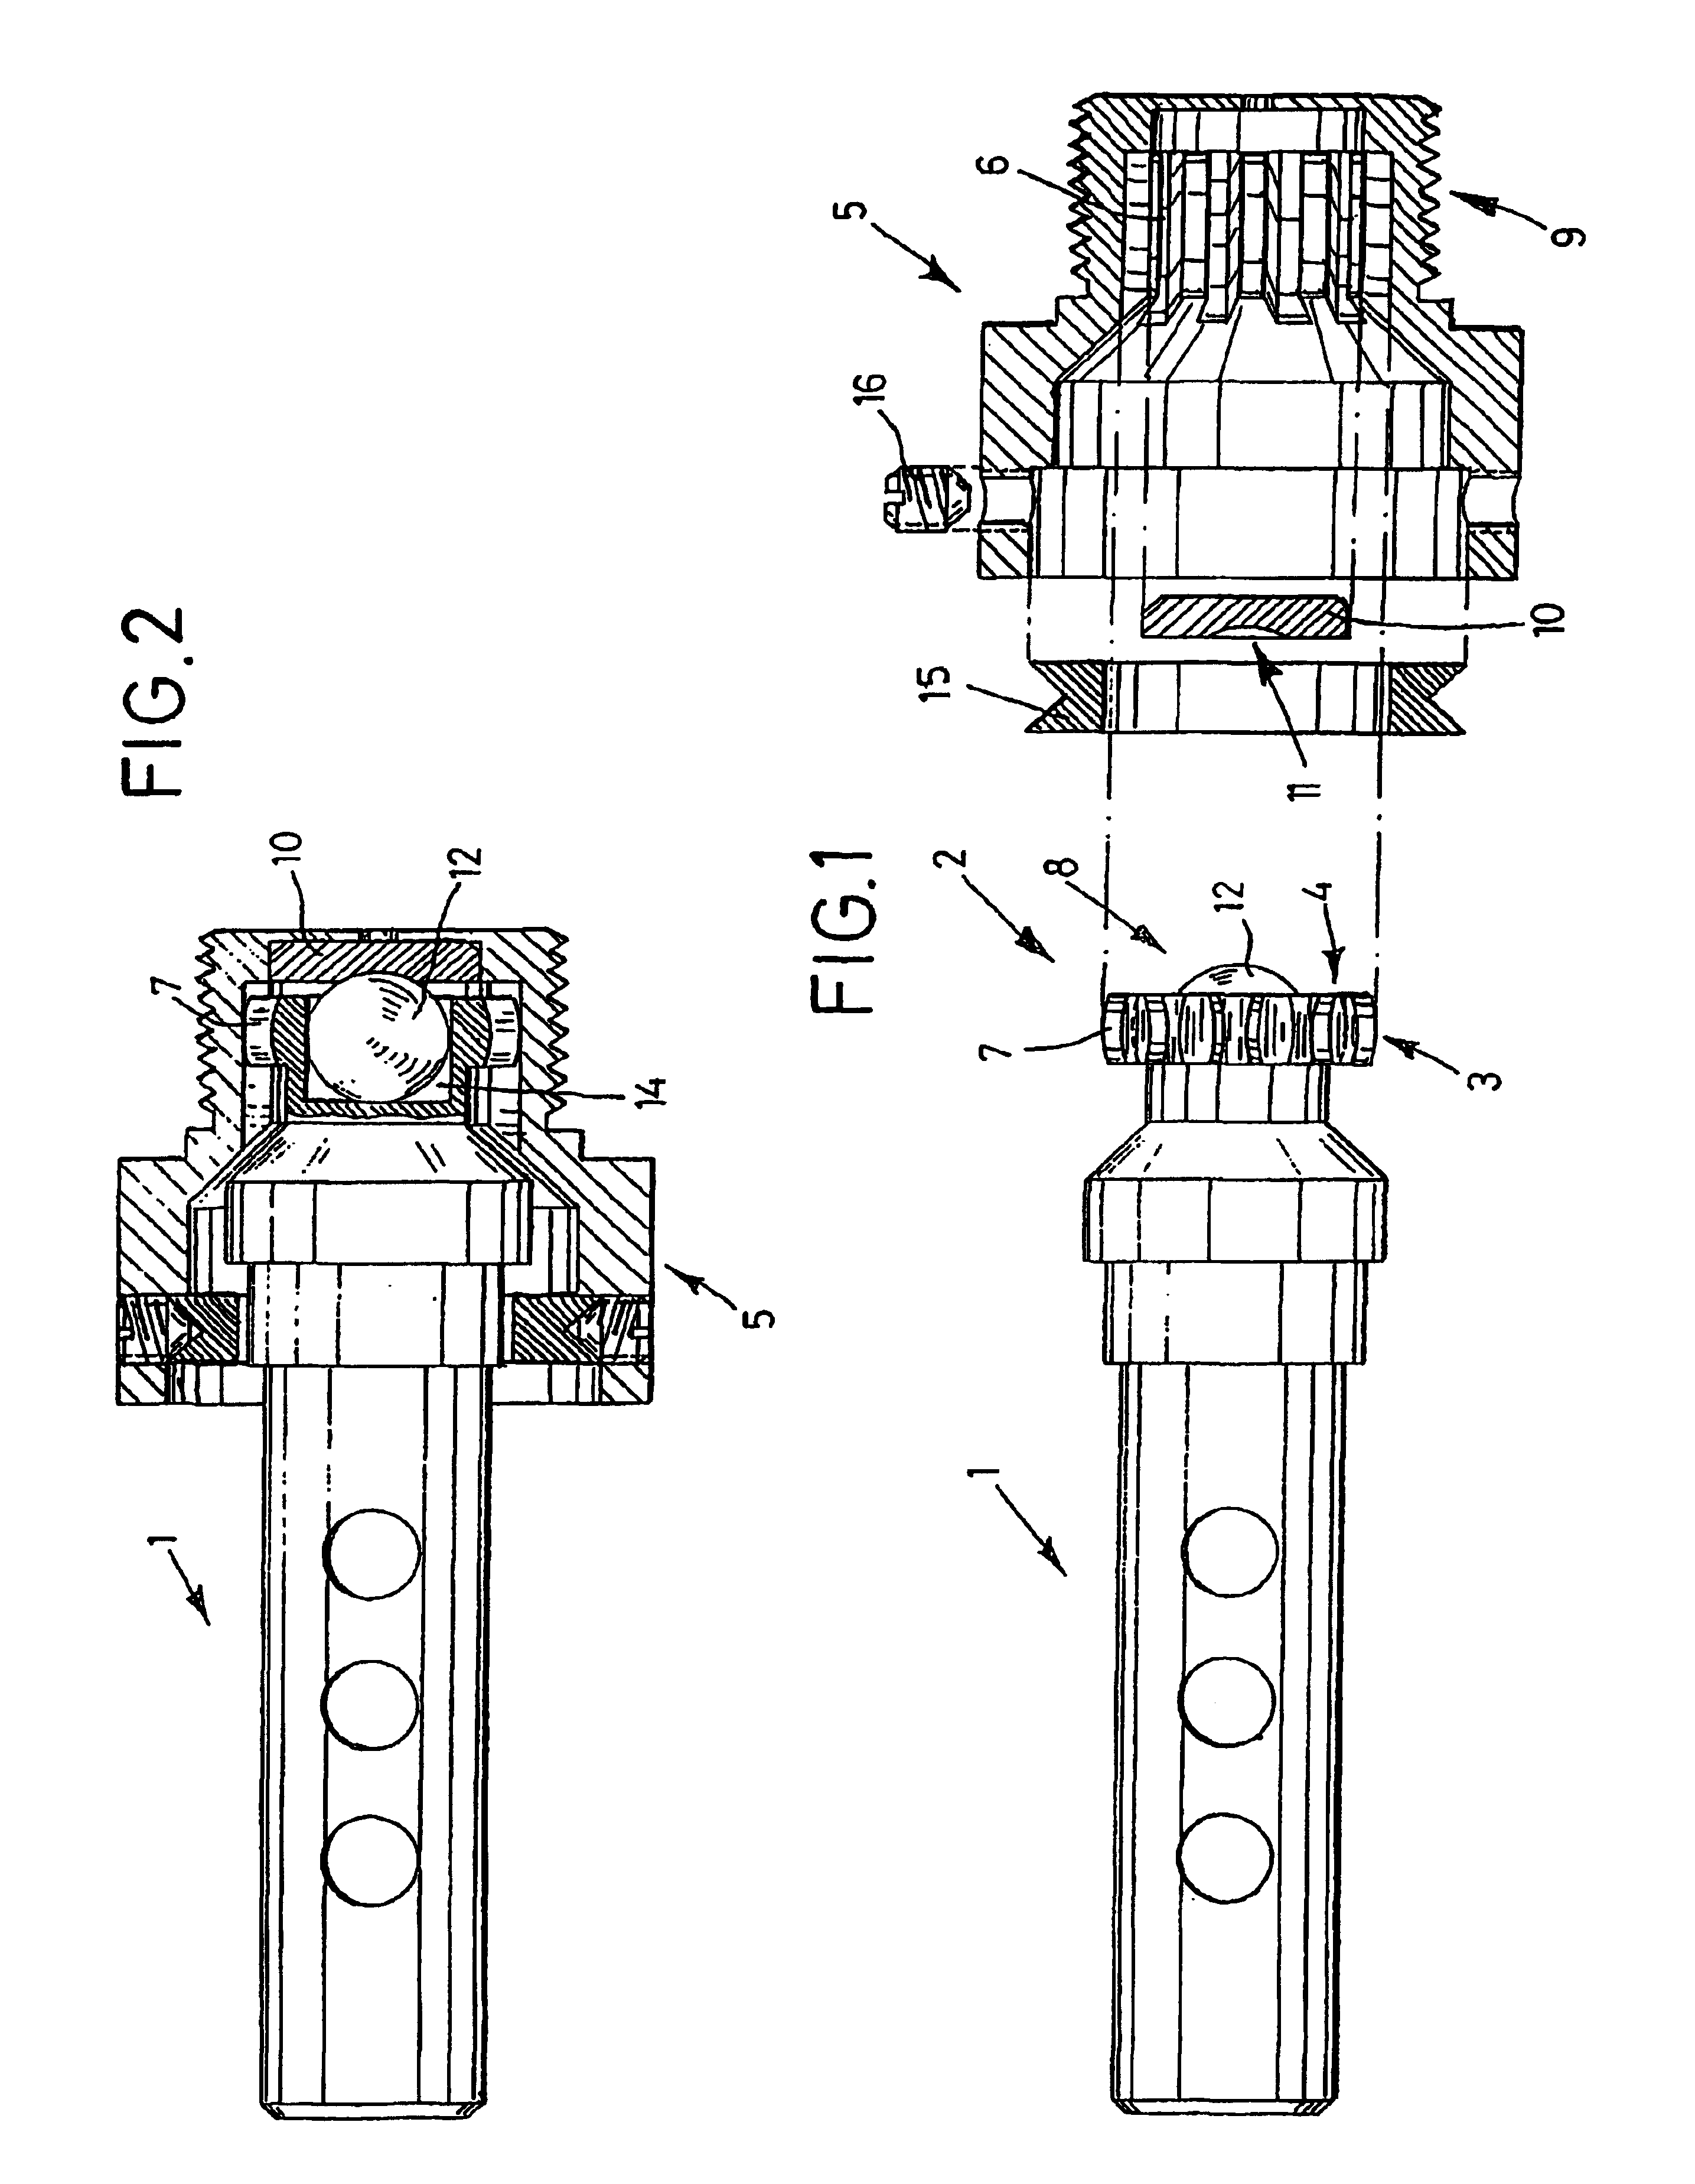 Assembly of a drive shaft with the cutting head hub of a submersible granulator